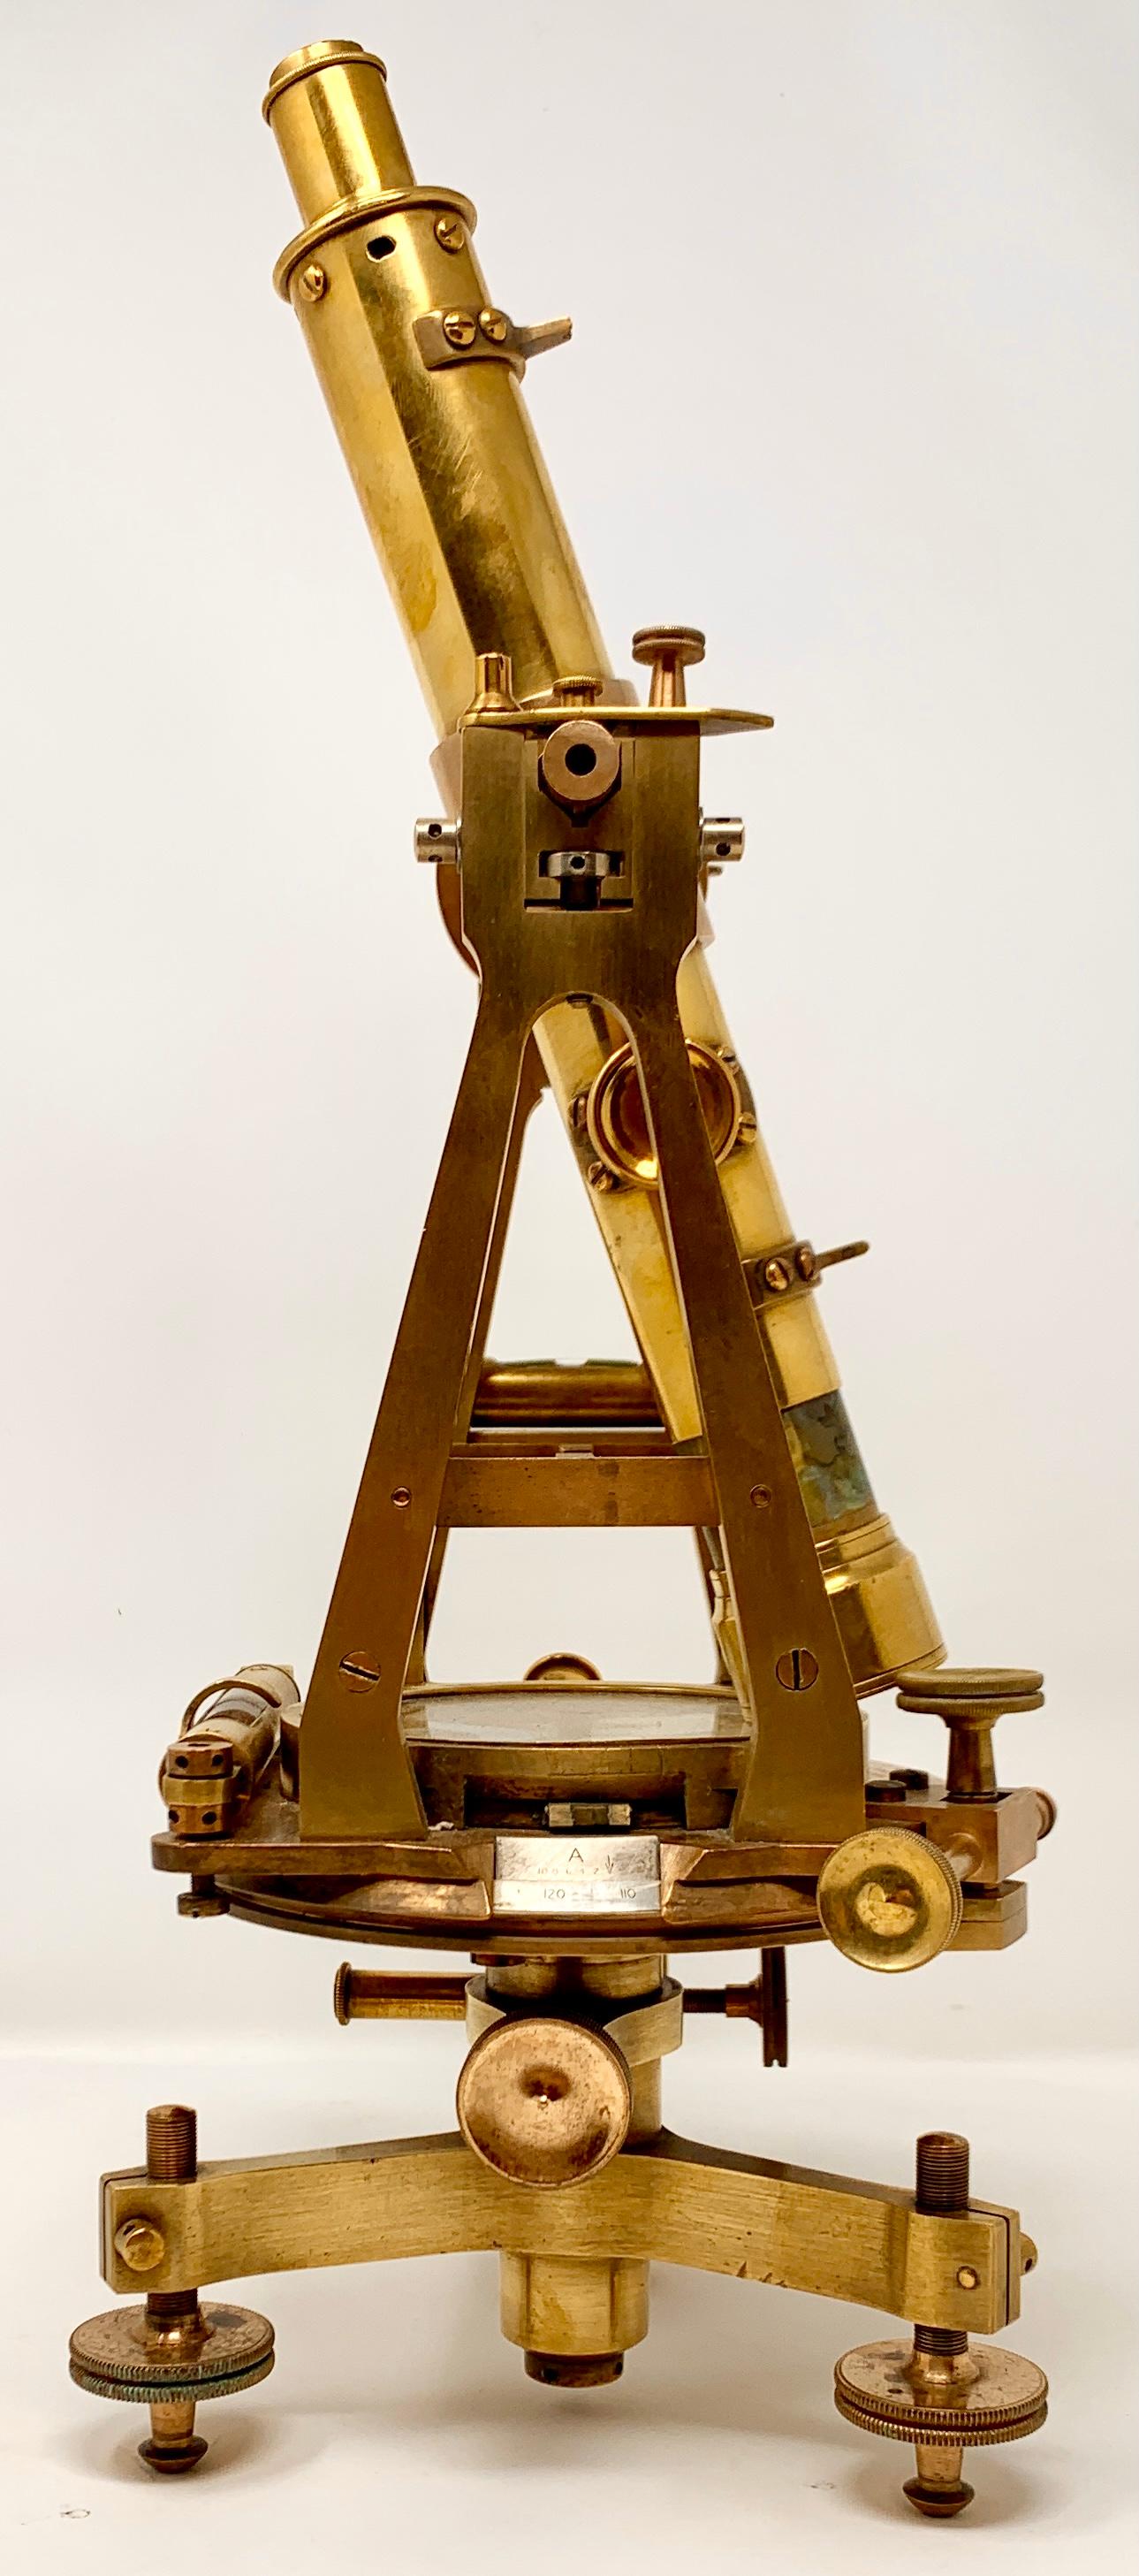 Antique English brass surveyor's transit theodolite made by Troughton & Simms of London, England and made For the jeweler, watchmaker & silversmith, John Pardy of Durban, South Africa, Circa 1890.